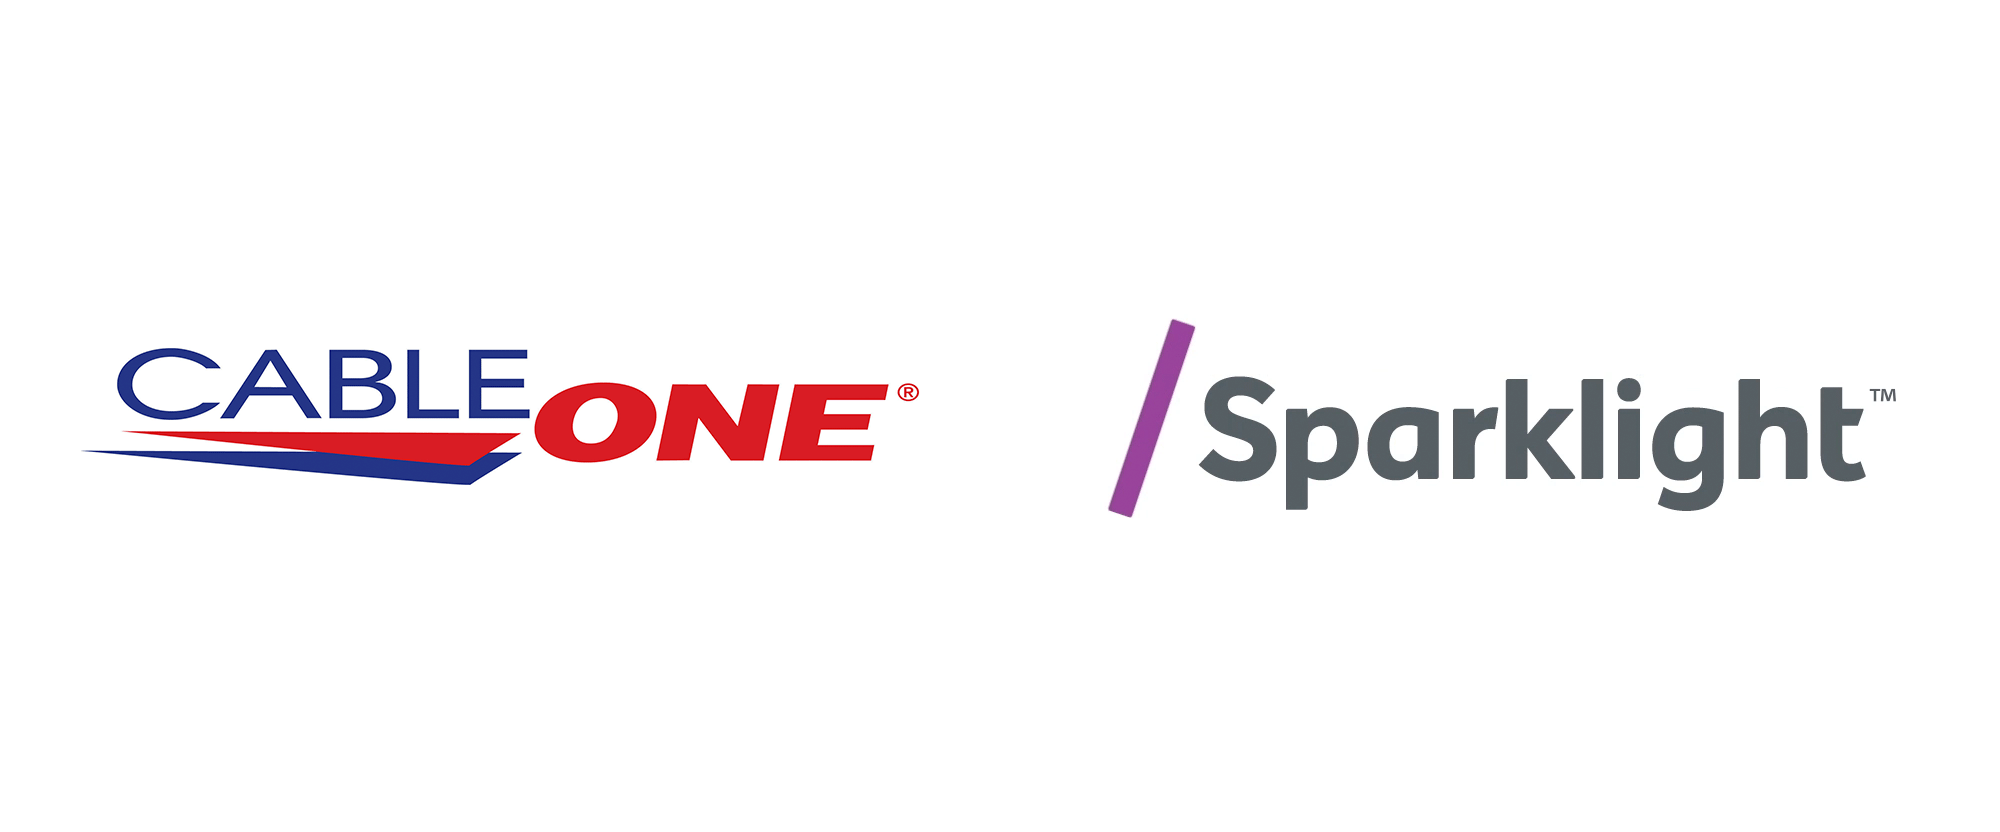 New Name and Logo for Sparklight